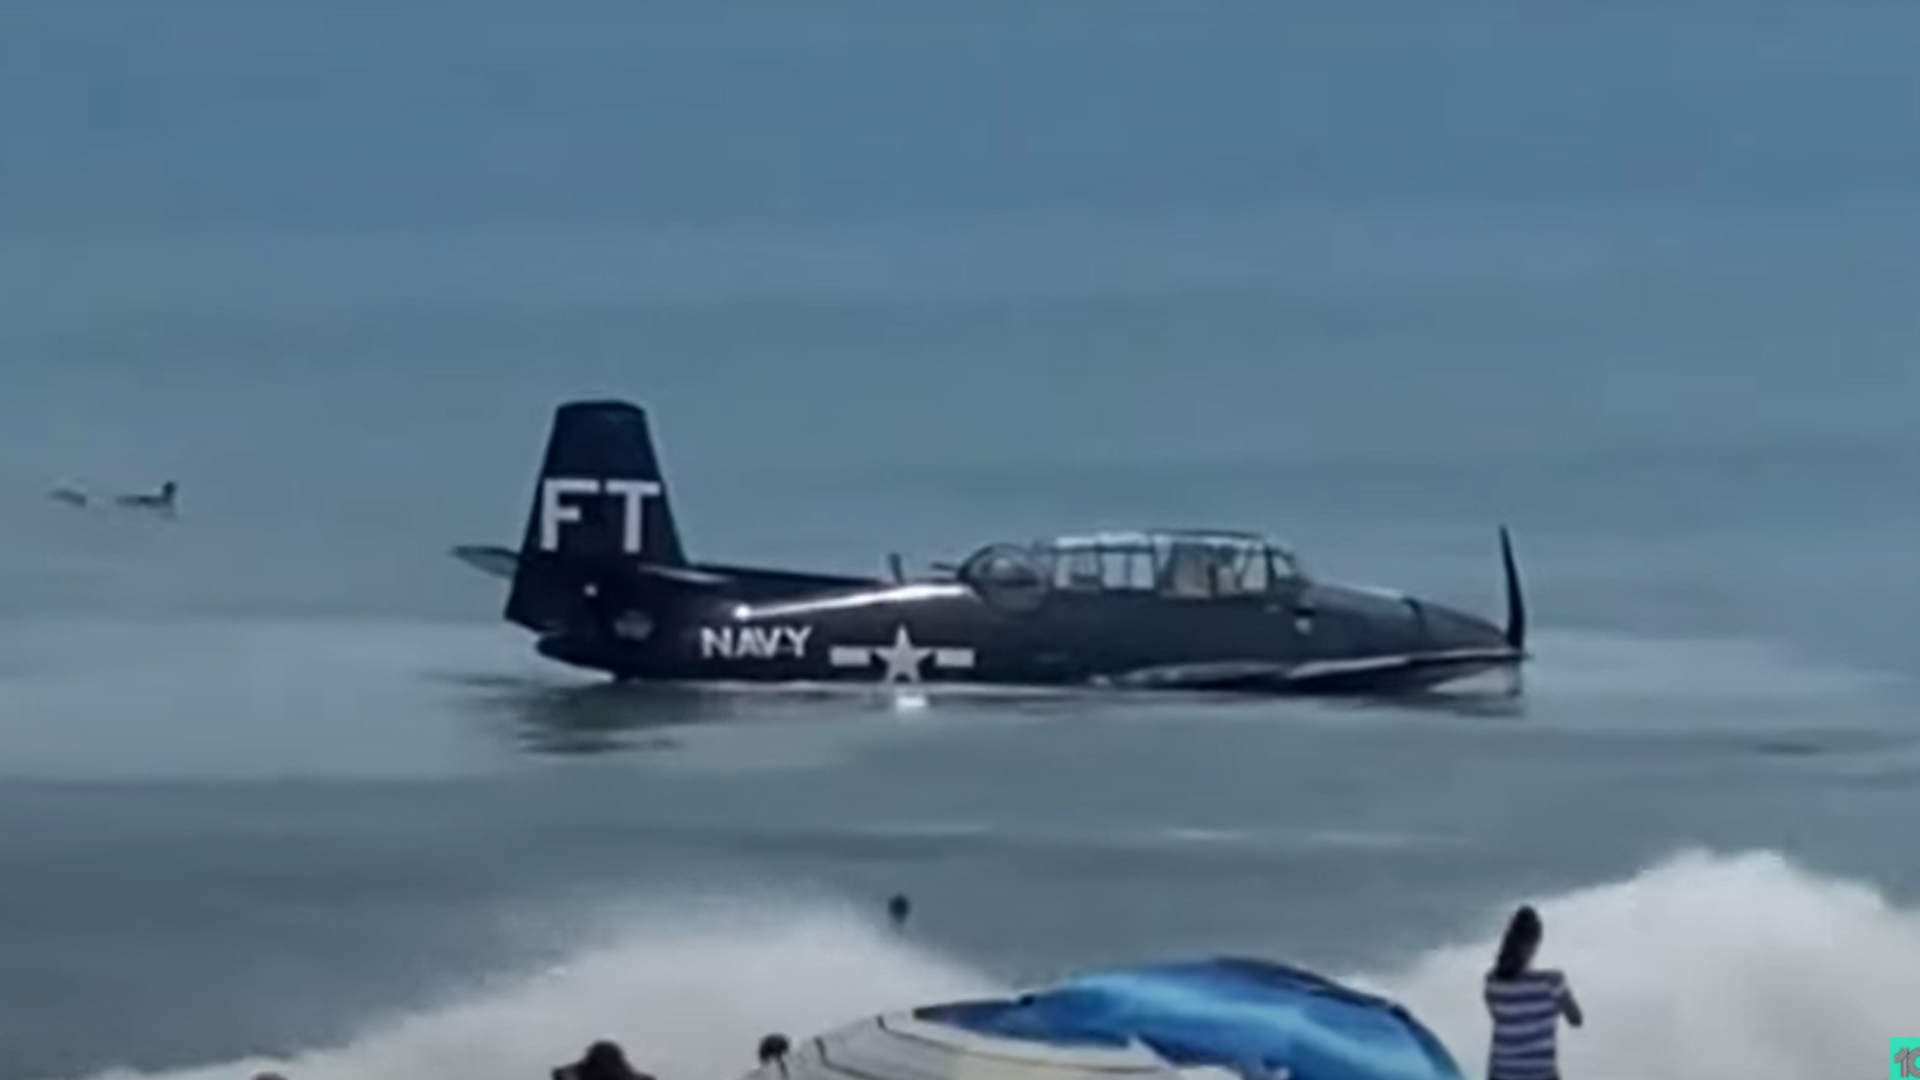 The air show said the pilot experienced mechanical issues during a performance.